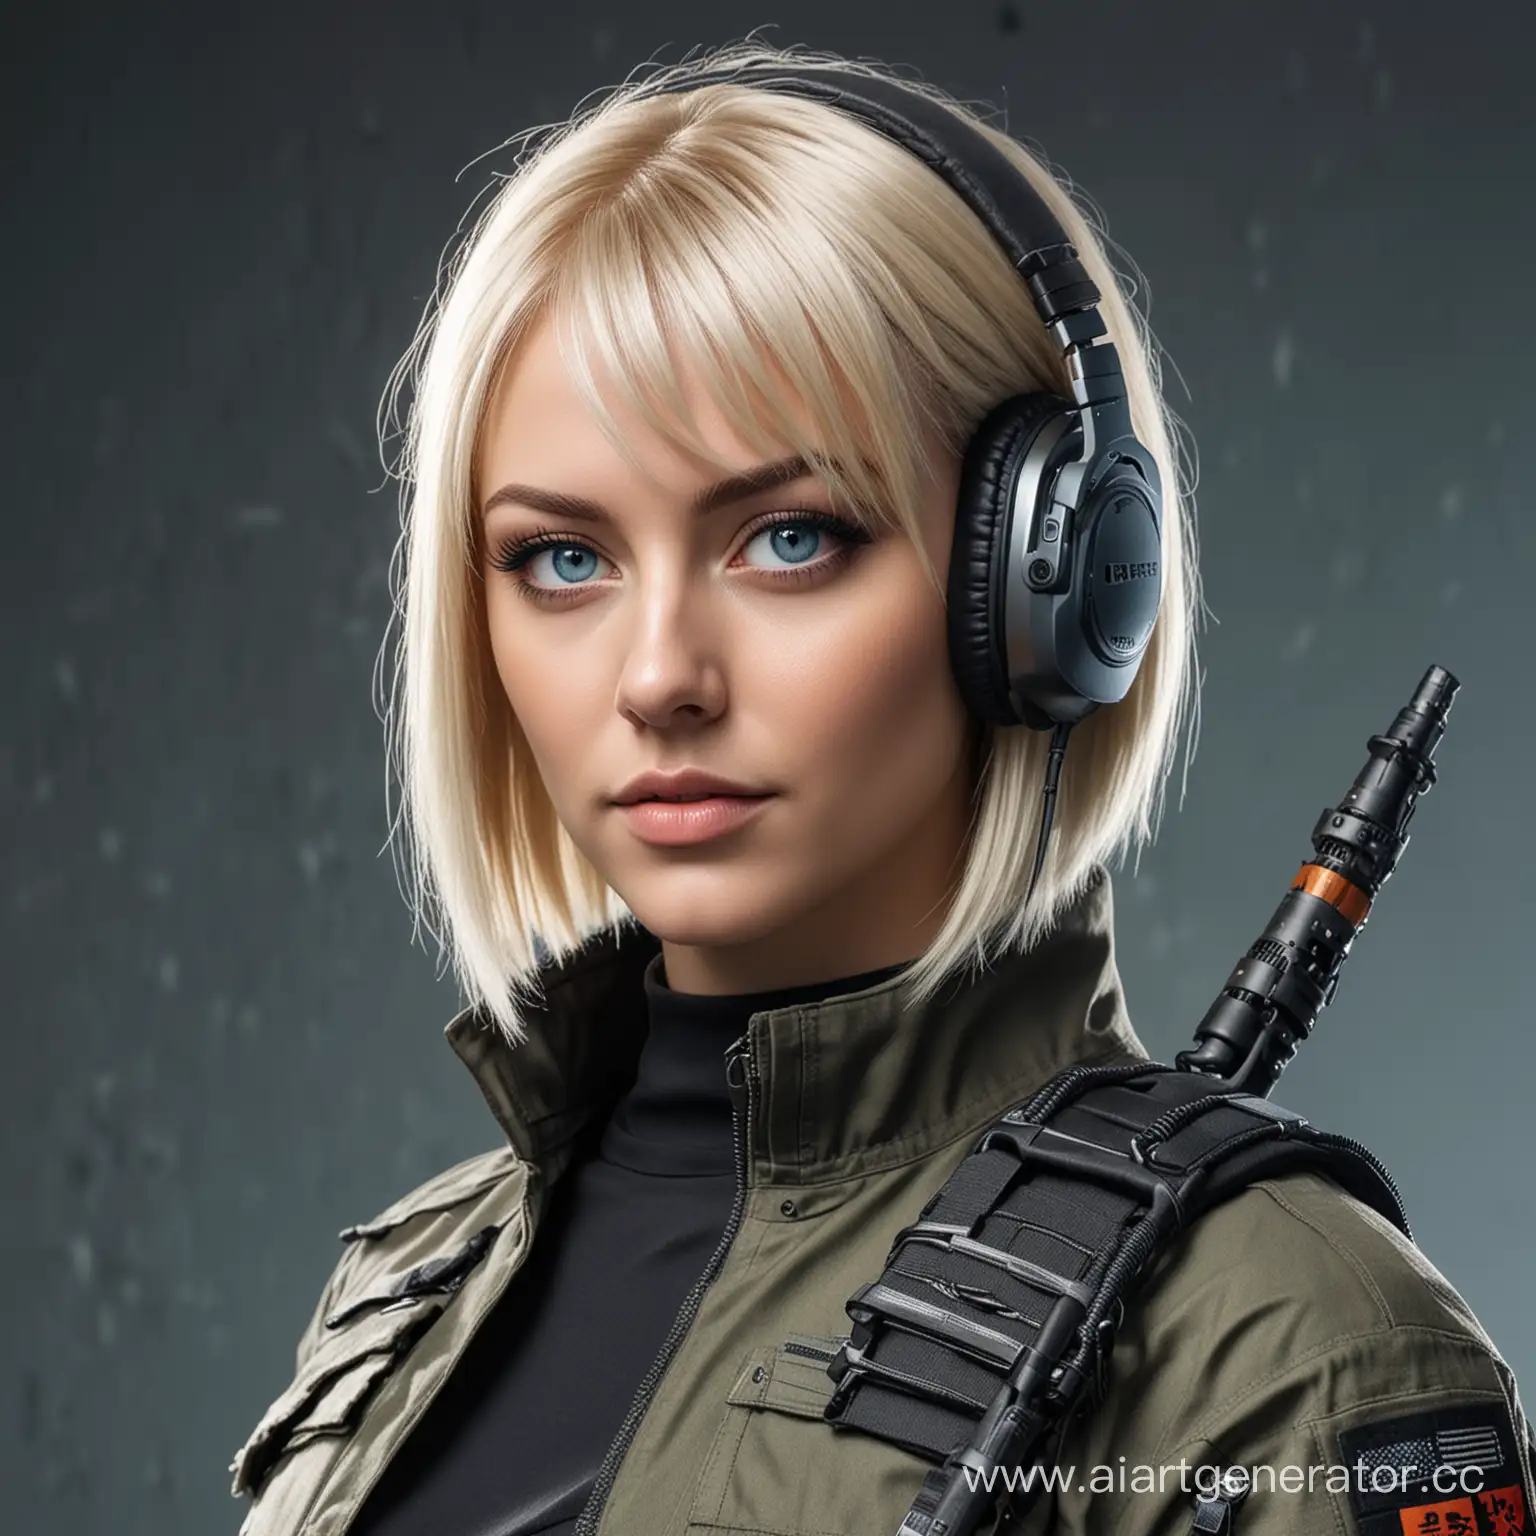 Cyberpunk-Blonde-Soldier-Broadcasting-Live-with-Weapon